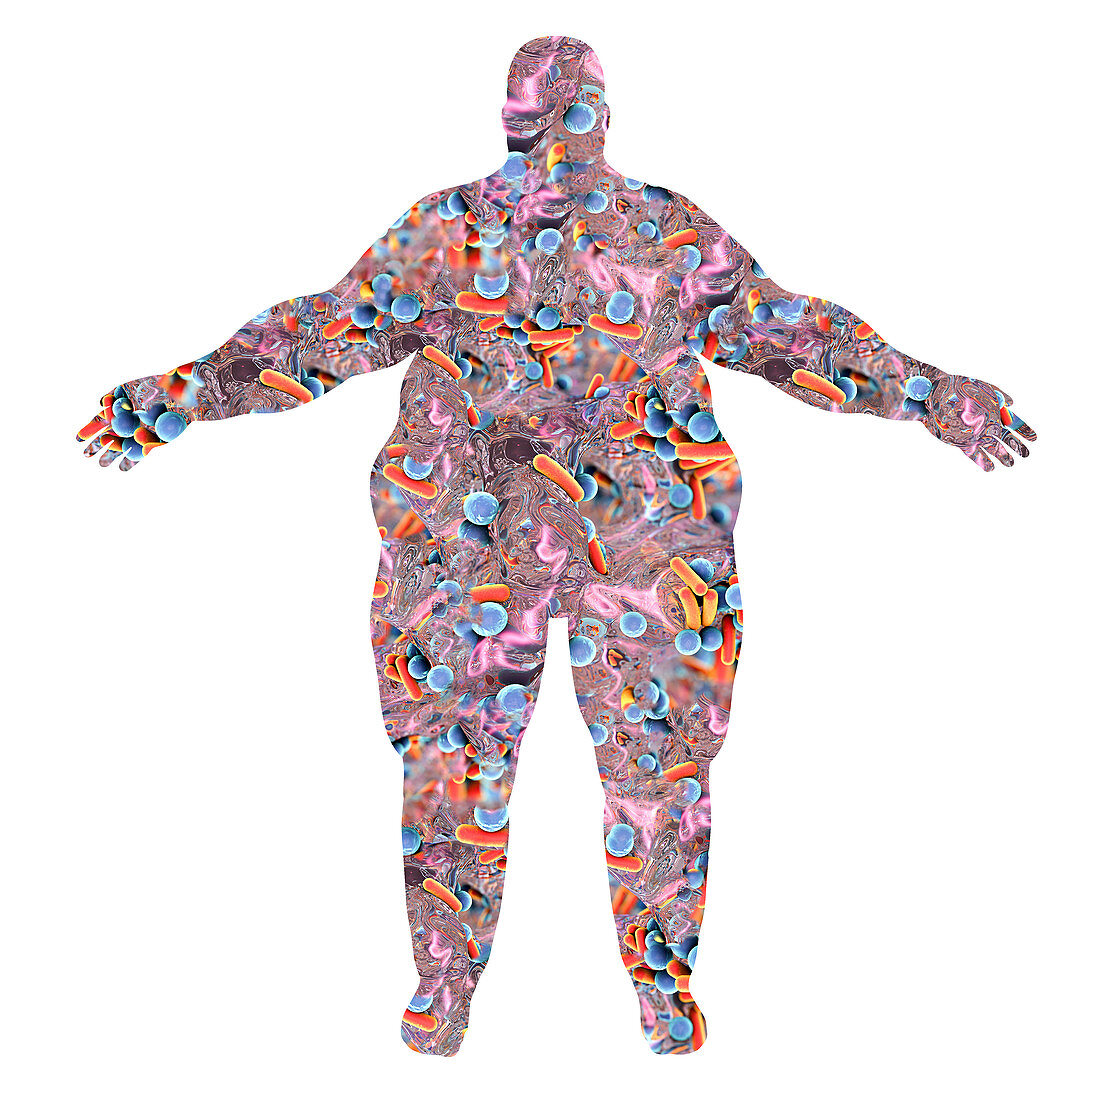 Human microbiome in obese person, illustration